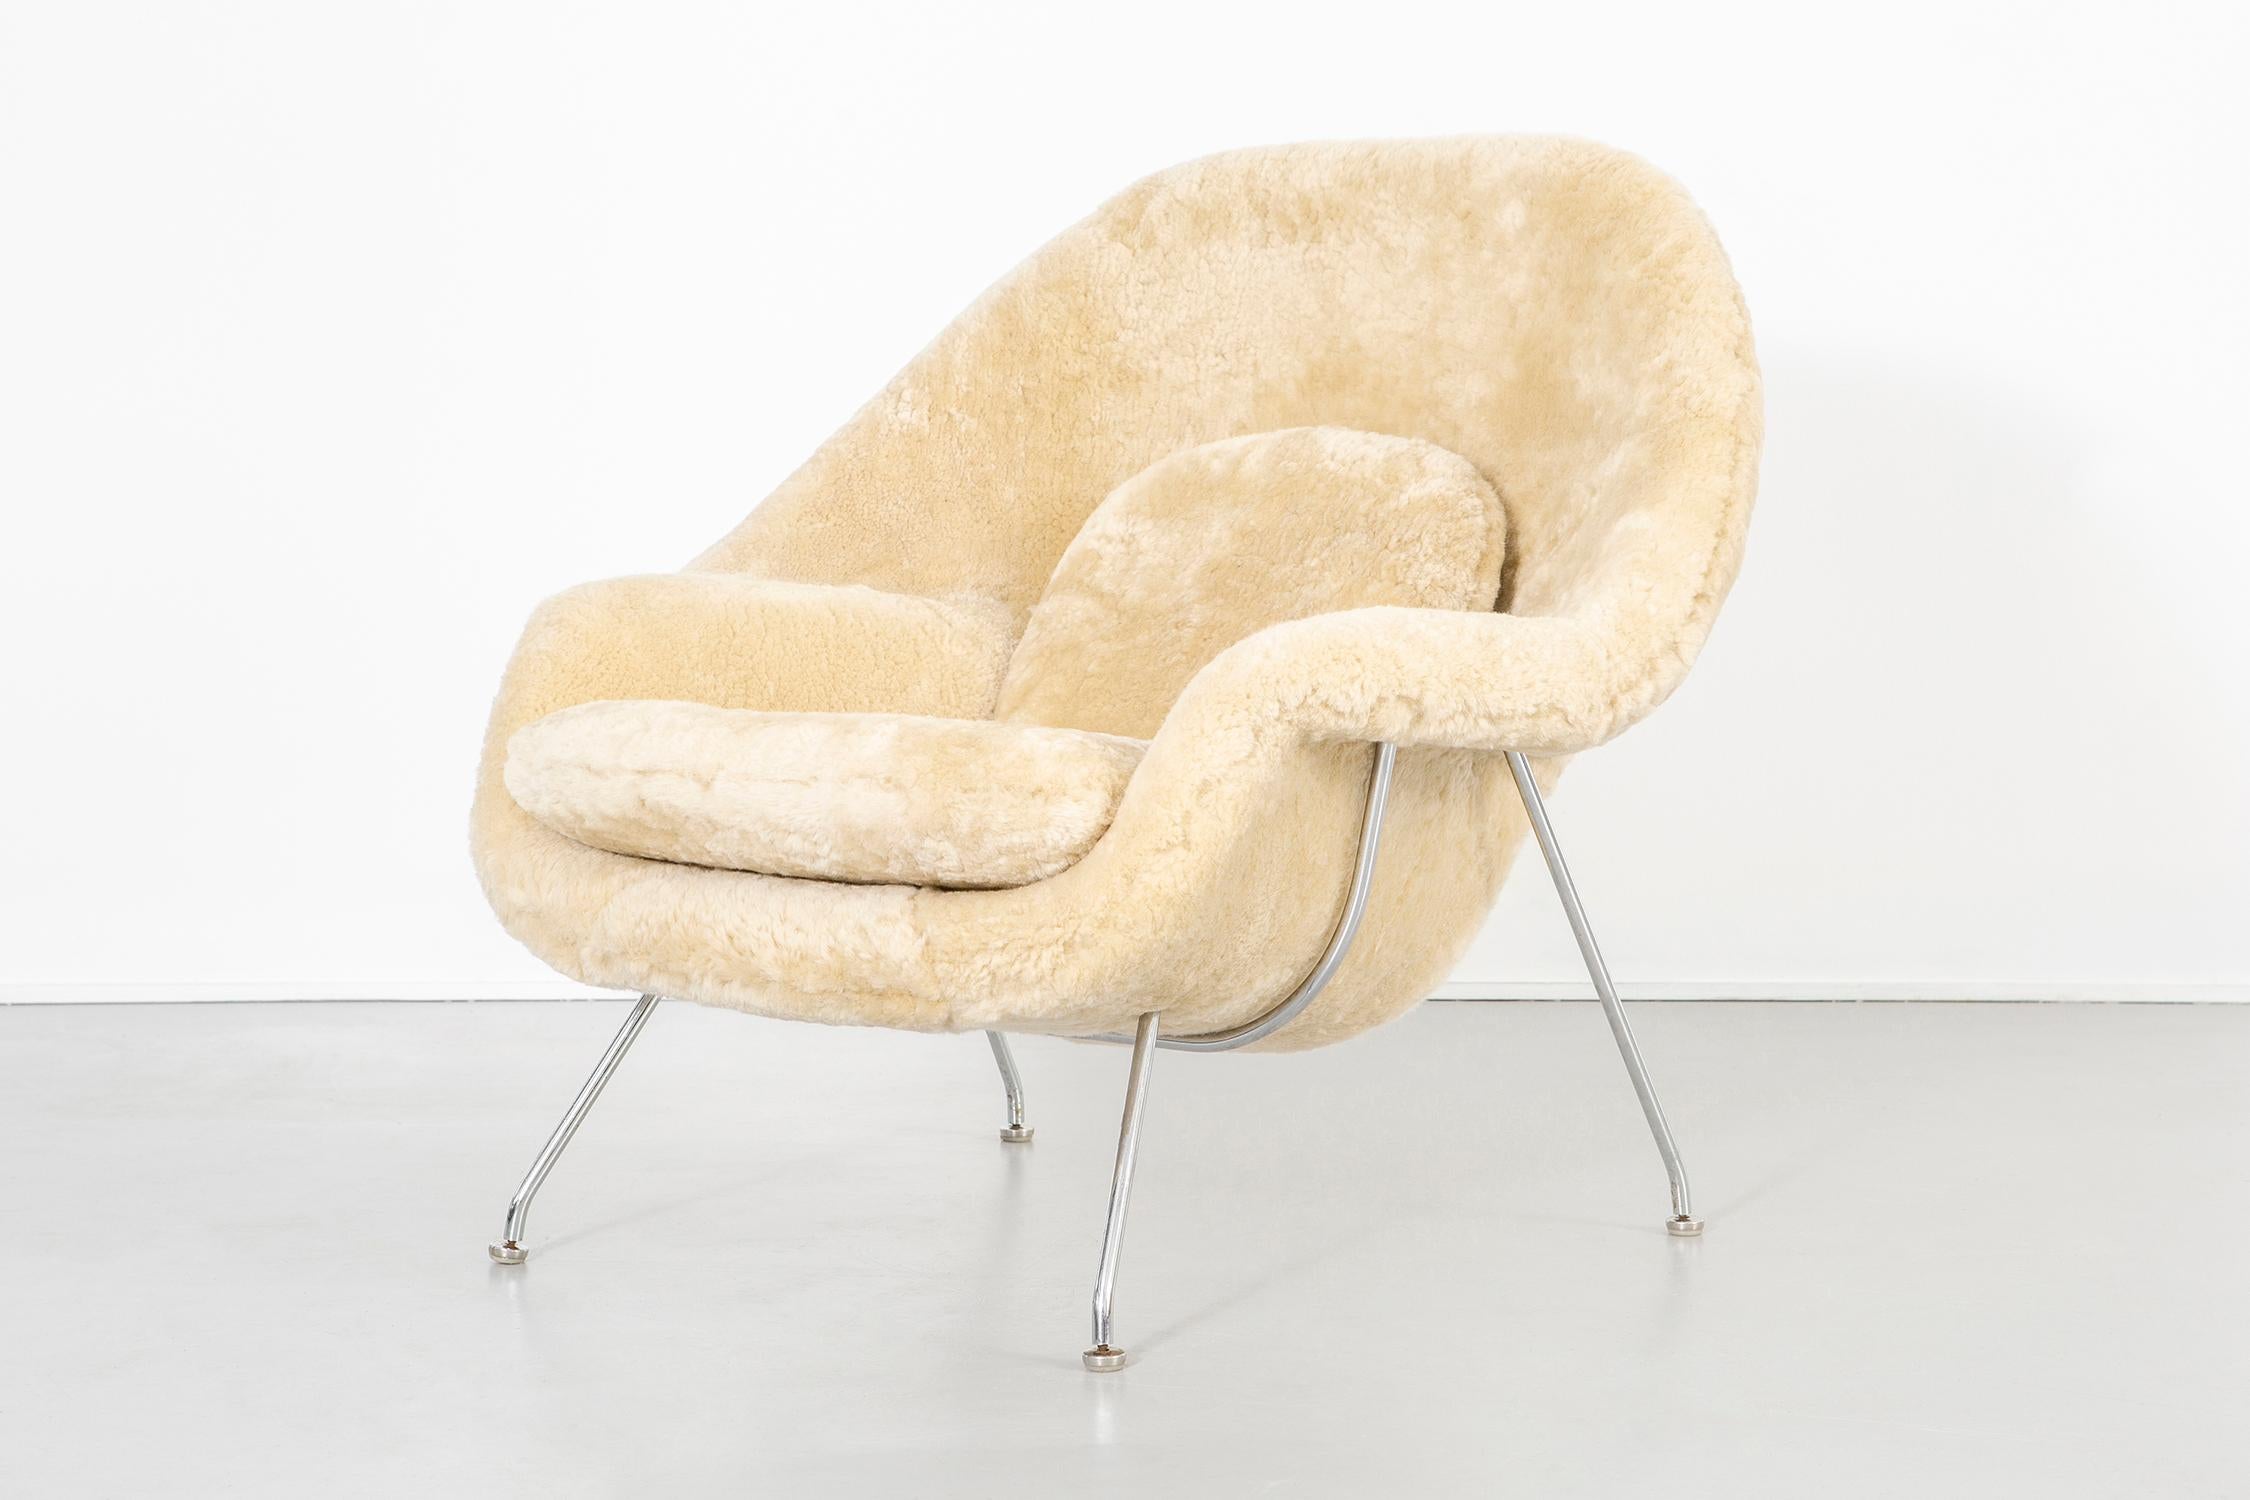 American Mid-Century Modern Eero Saarinen for Knoll Womb Chair Reupholstered in Shearling For Sale